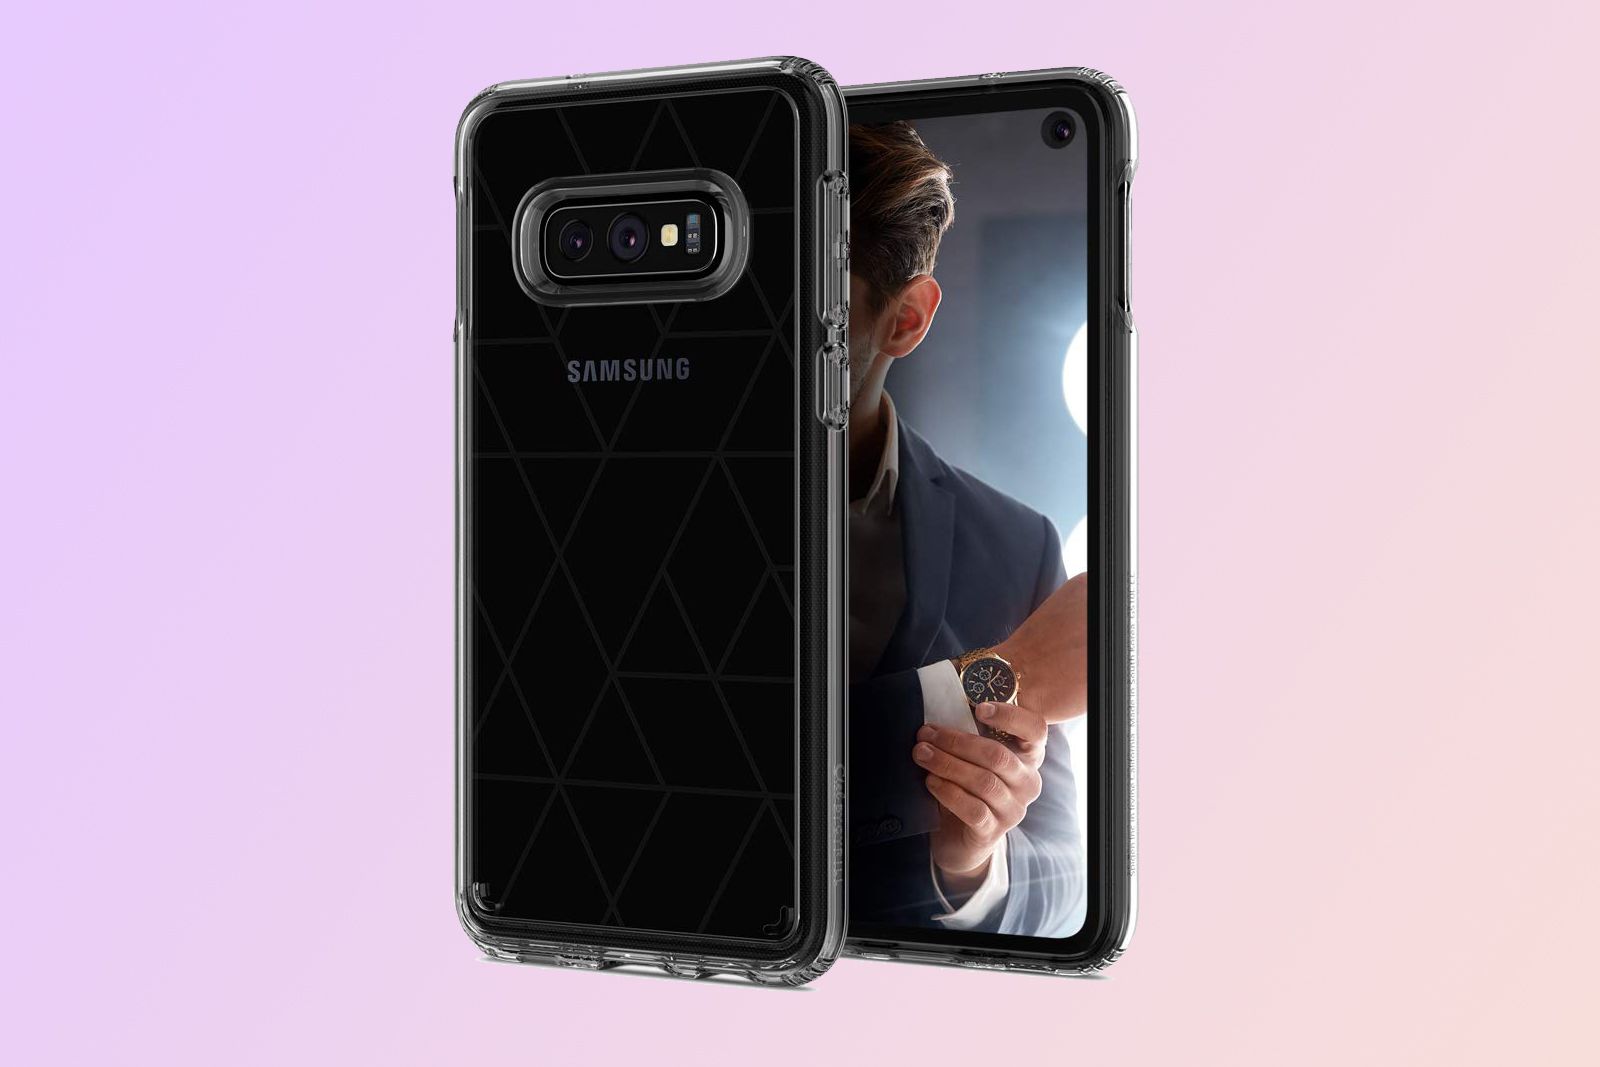 Best Galaxy S10e S10 And S10 Cases Protect Your New Samsung Device image 6